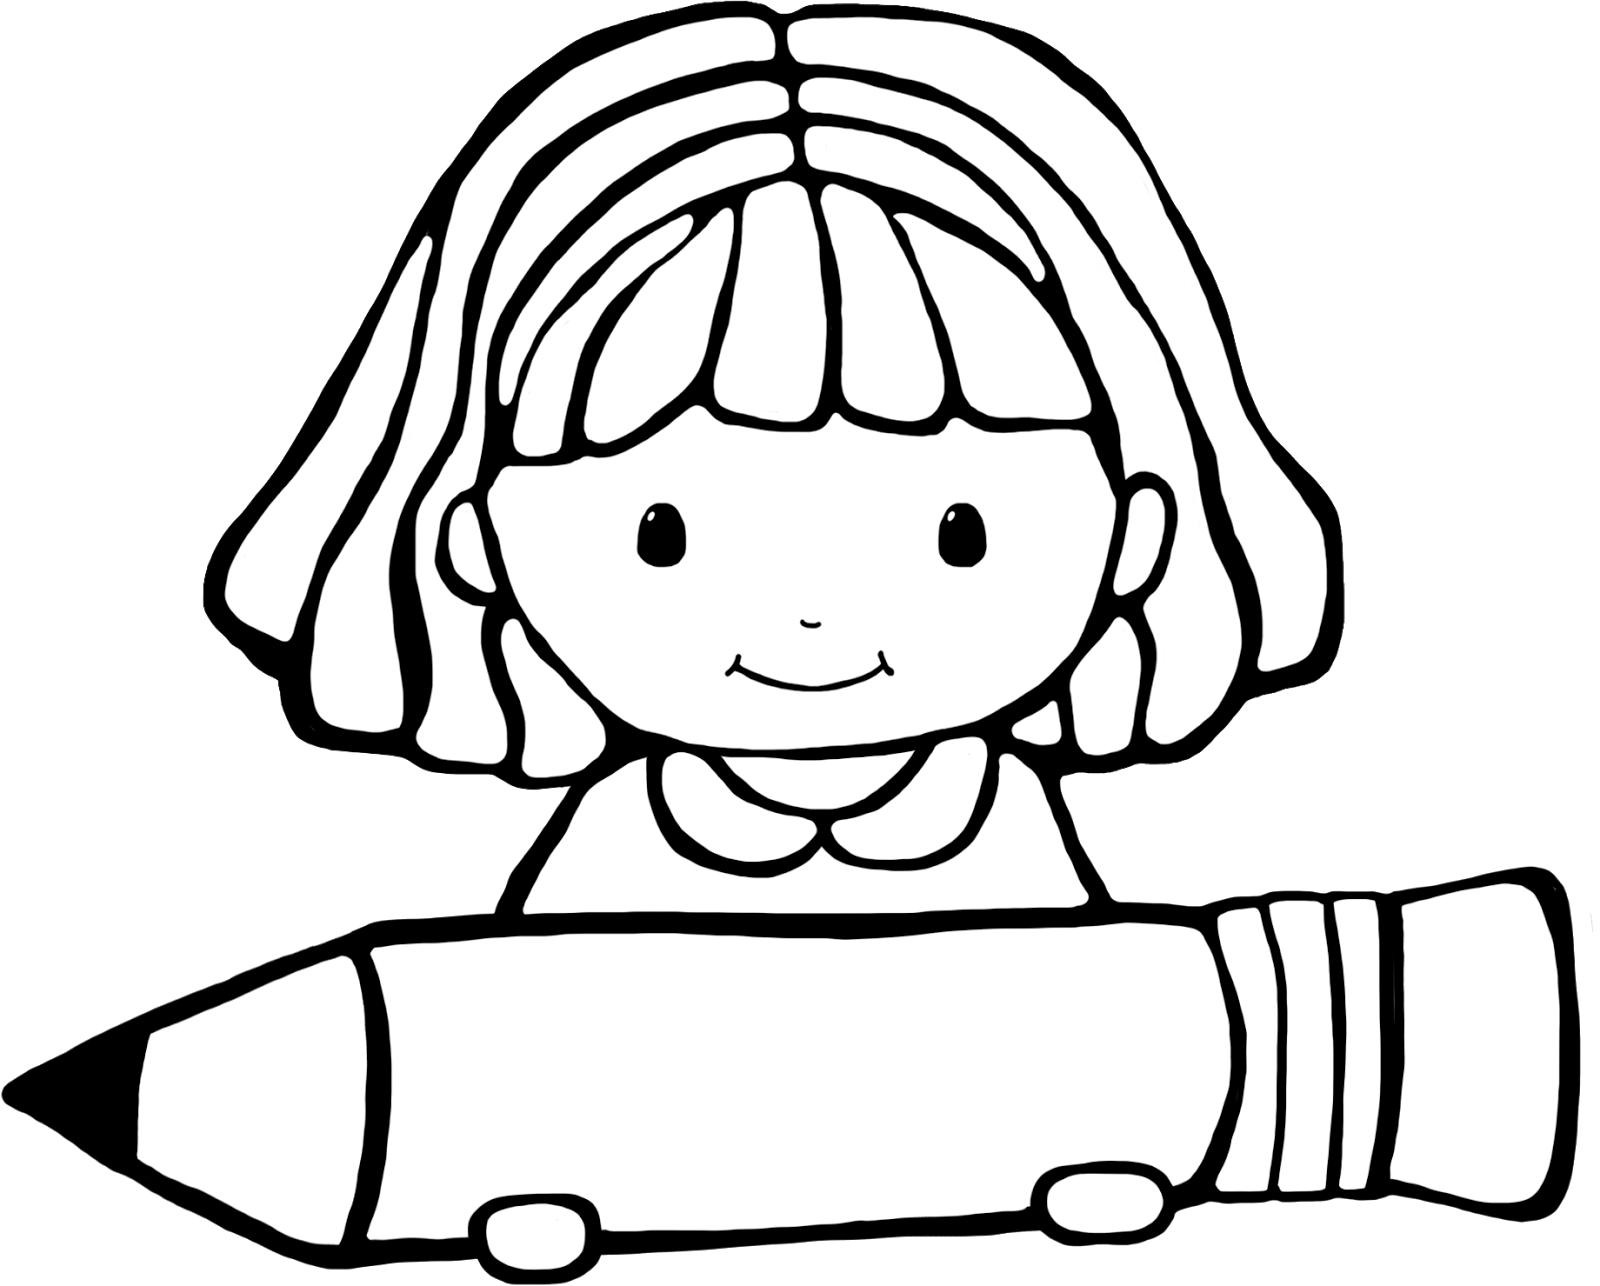 Writing Clipart Black and White craft projects, Black and White ...